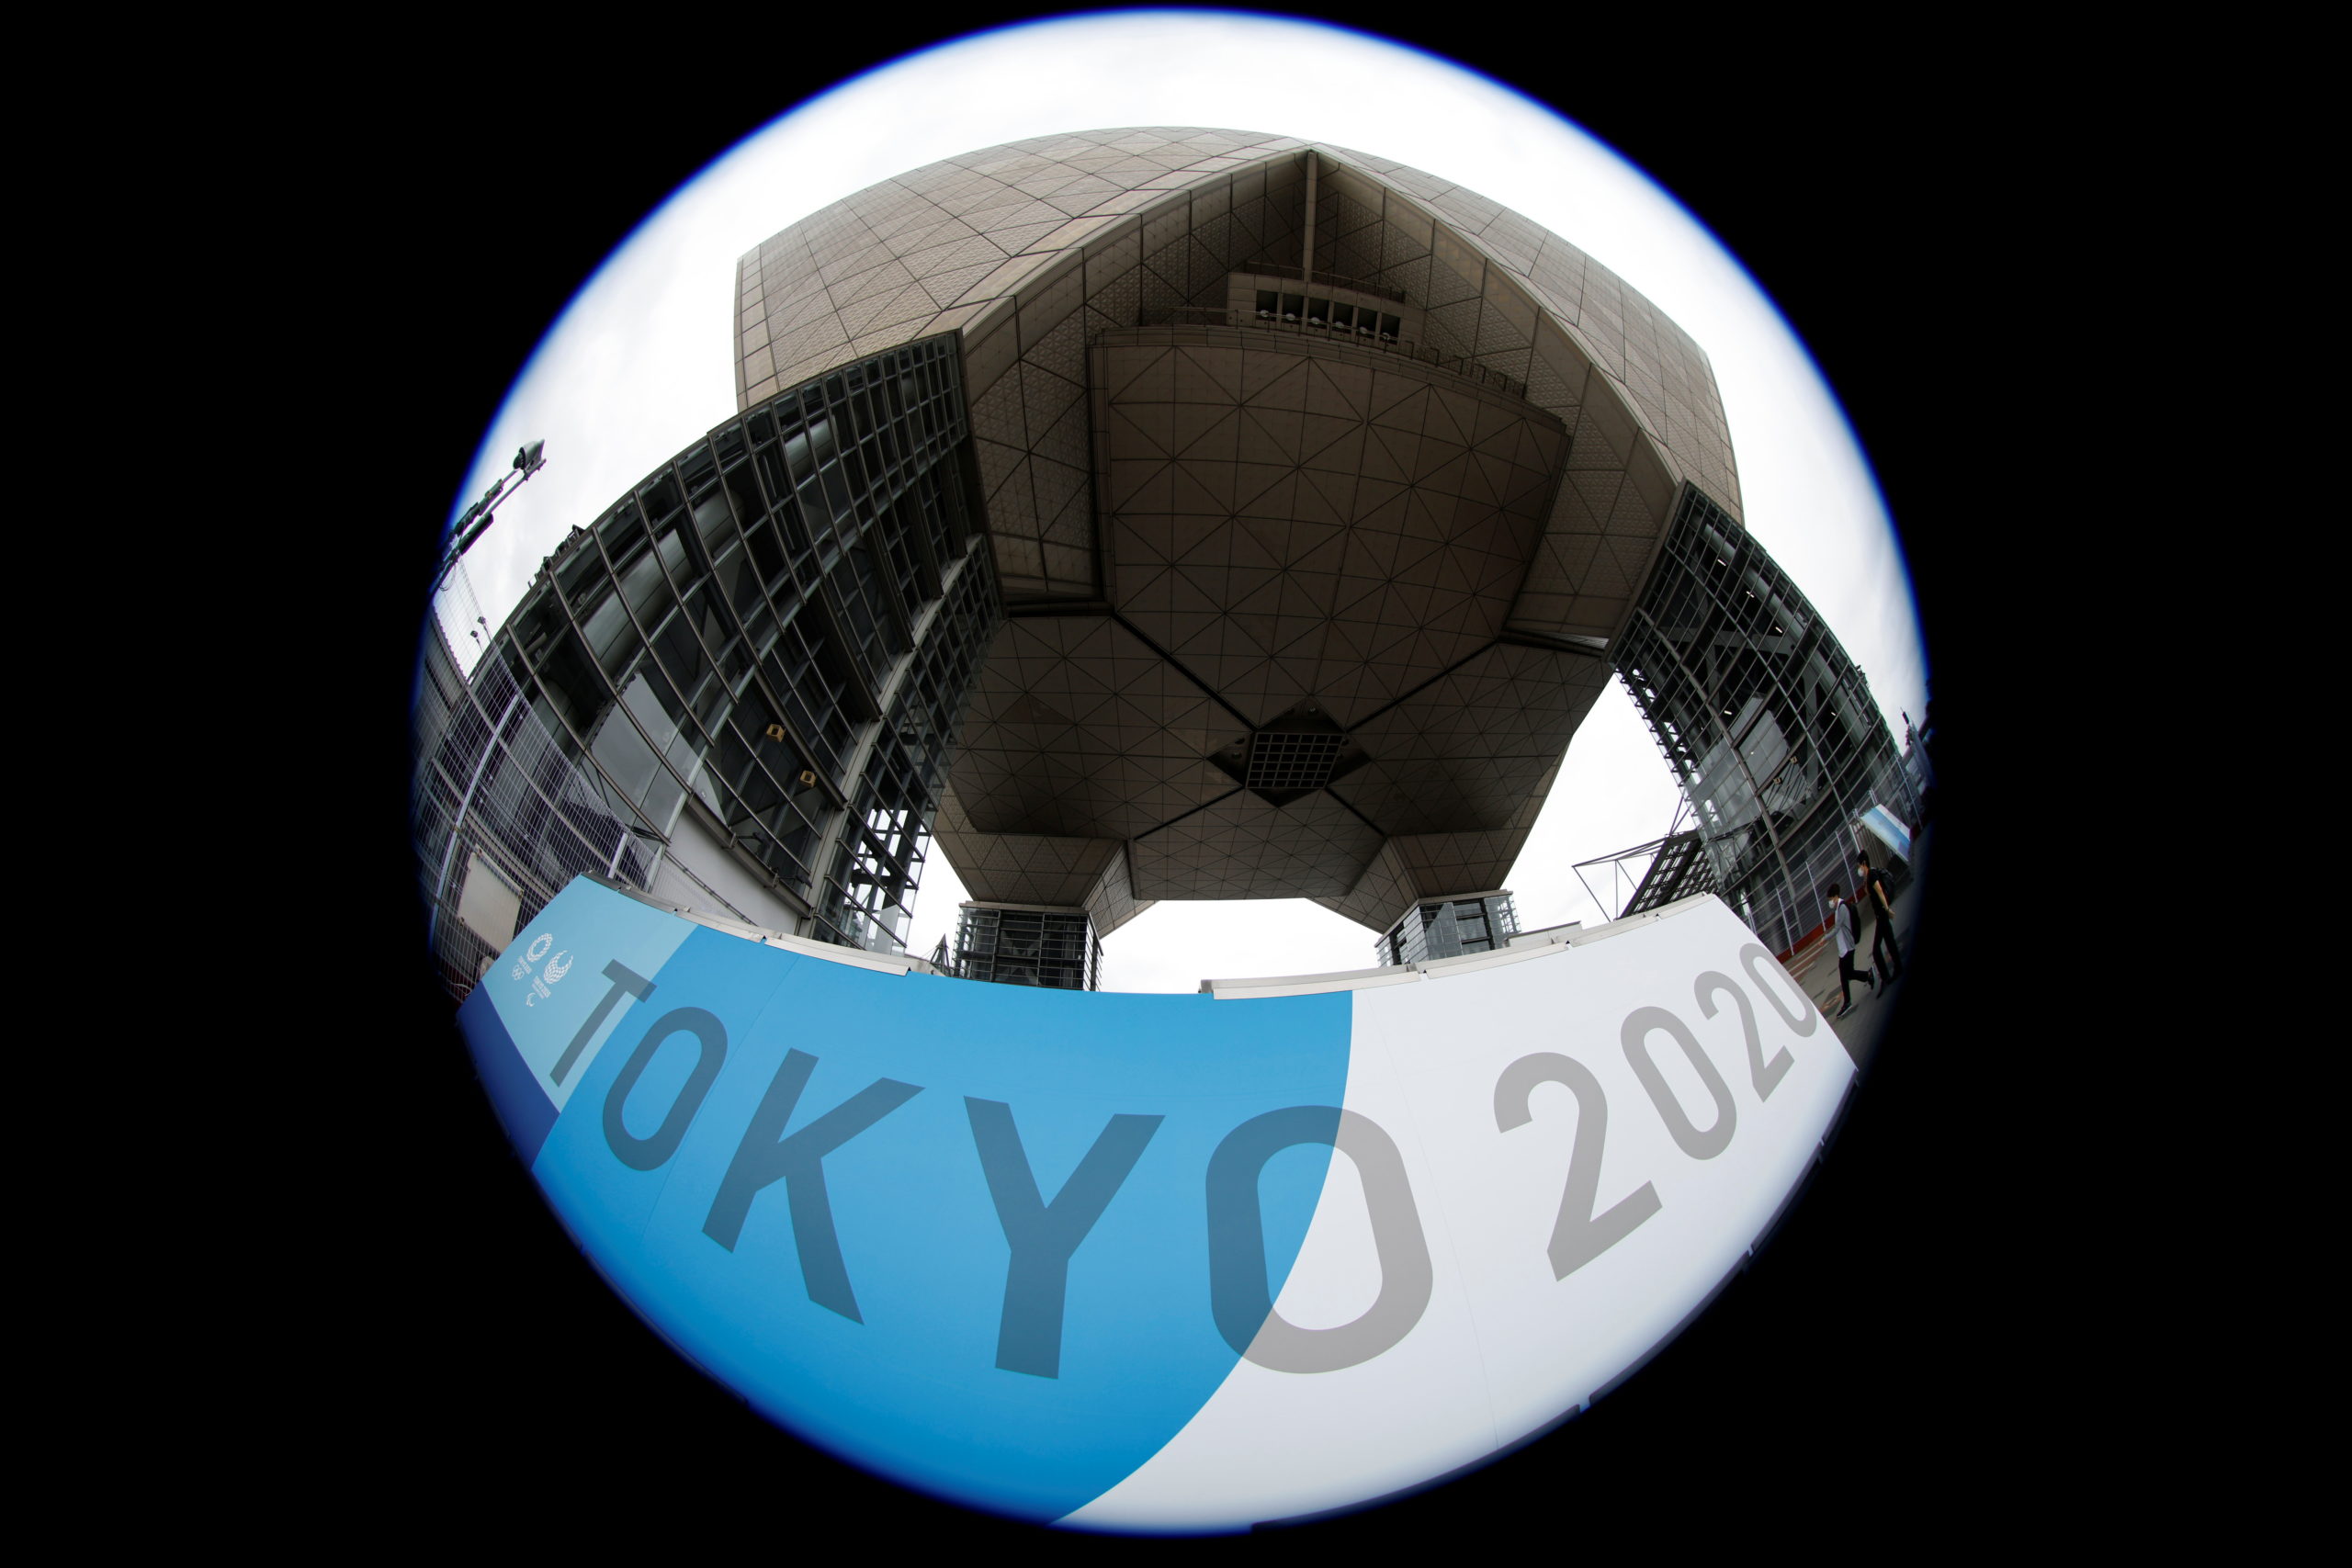 People walk past a sign for the 2020 Tokyo Olympic Games that have been postponed to 2021 due to the coronavirus disease (COVID-19) pandemic, at the IBC/MPC media center at Tokyo Big Sight exhibition center in Tokyo, Japan